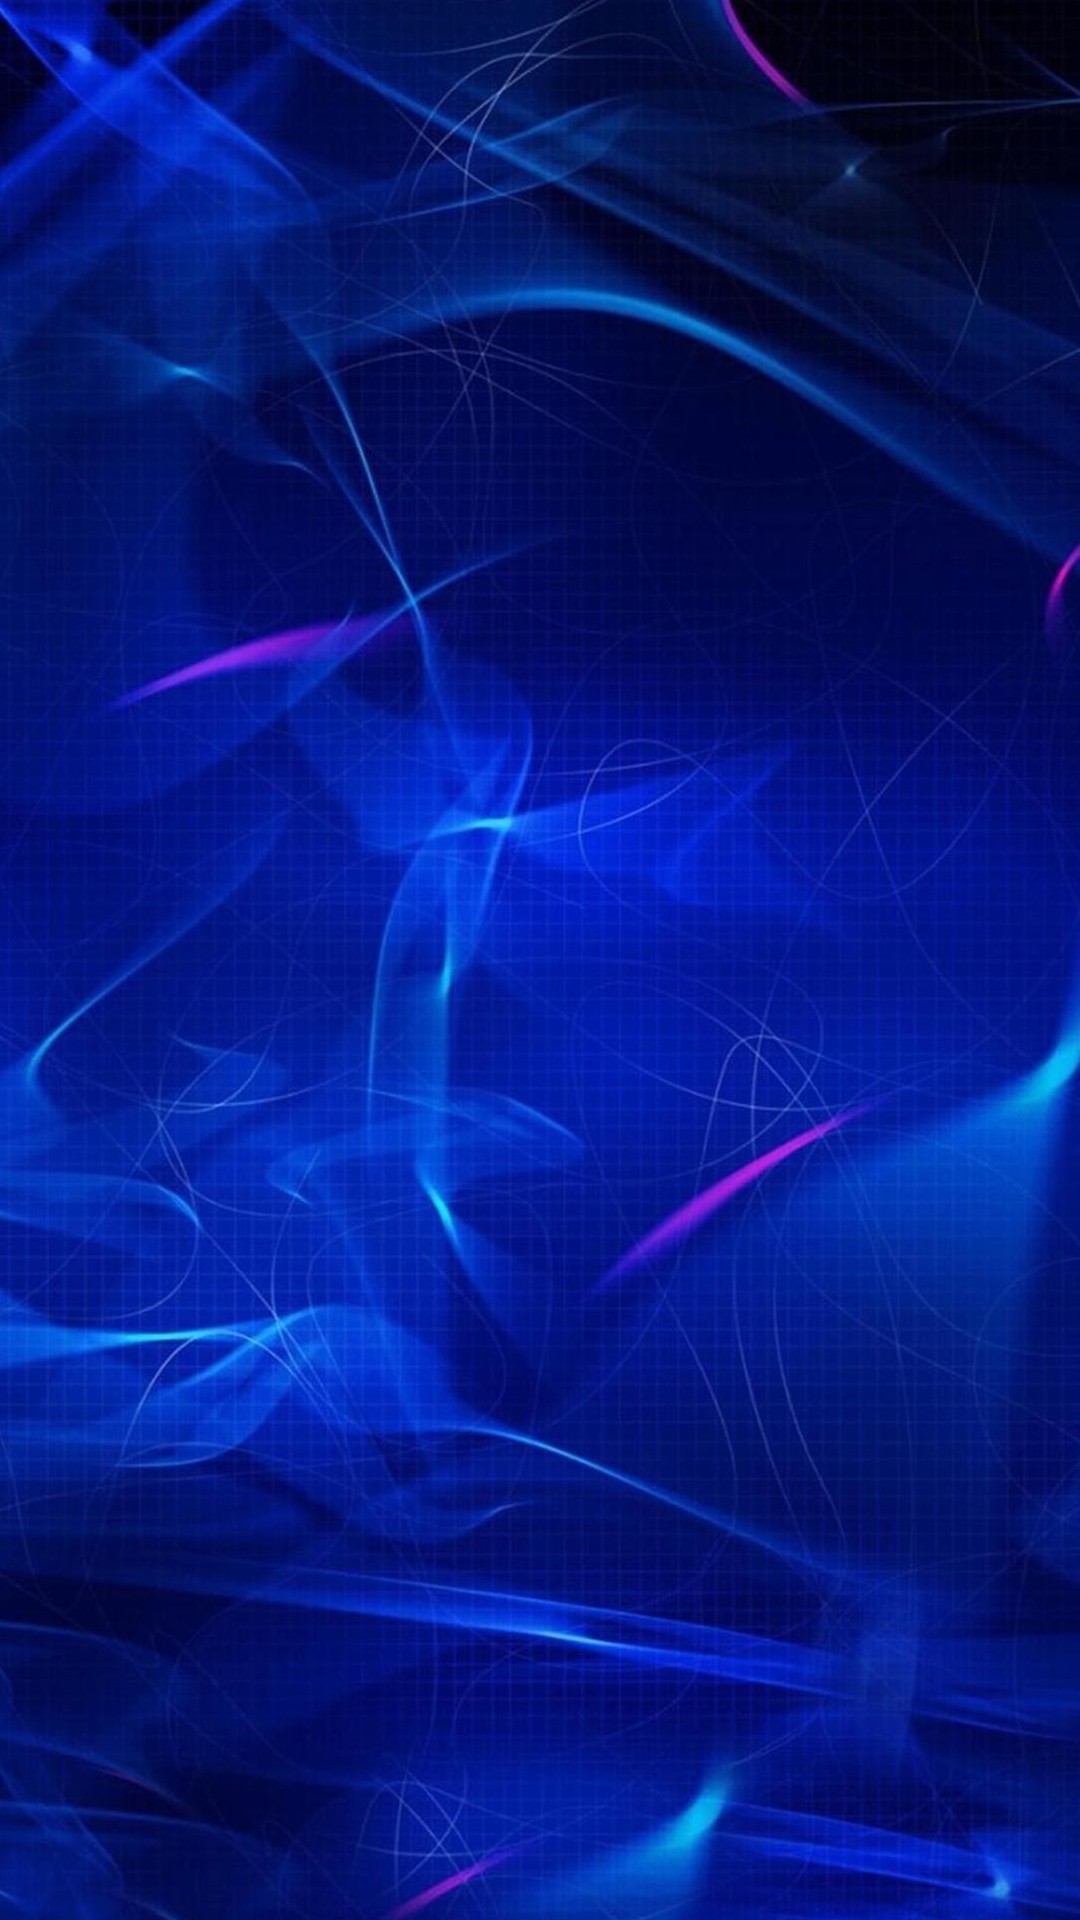 Abstract Xperia Z Wallpapers Hd 177 Xperia Z1 Zl Wallpapers And Backgrounds Iphone12 スマホ壁紙 待受画像ギャラリー